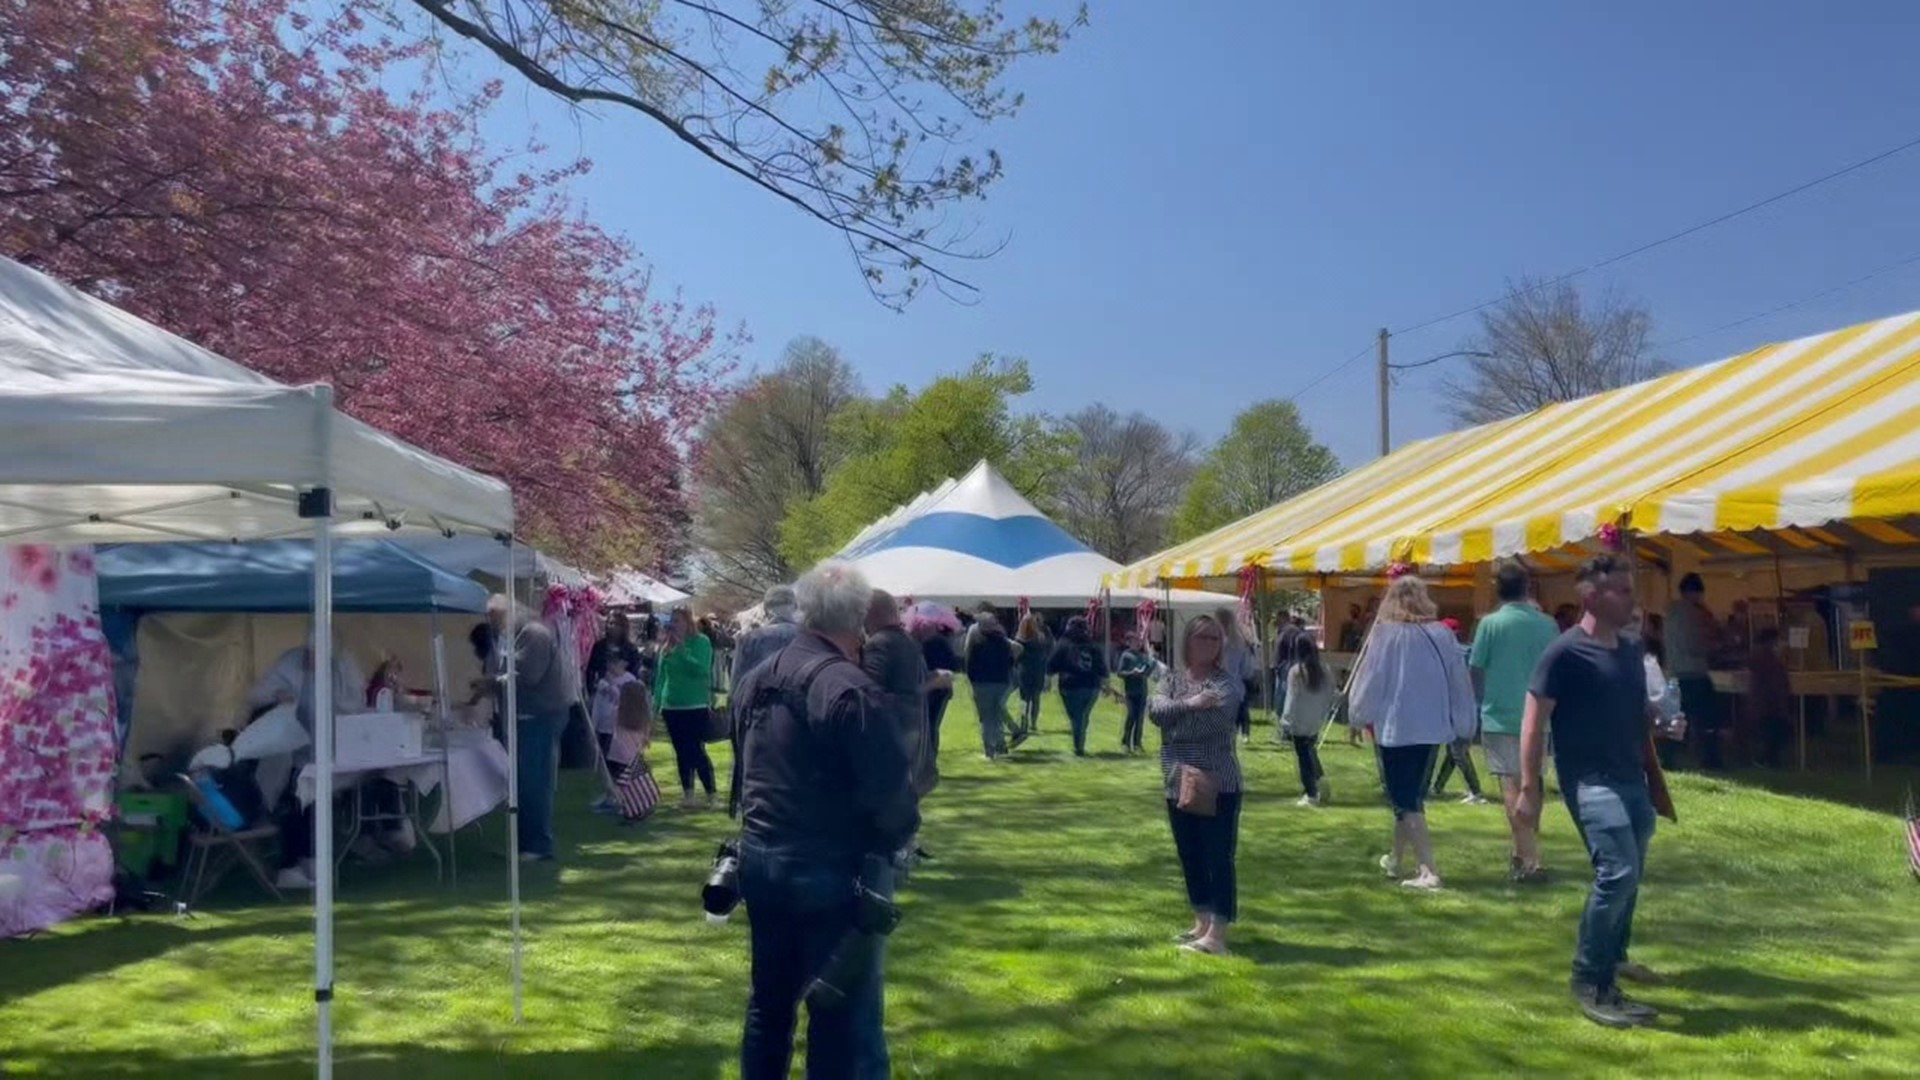 A beautiful day for a cherry blossom festival. Newswatch 16's Chelsea Strub shows us some sights and sounds from one such festival in Luzerne County.